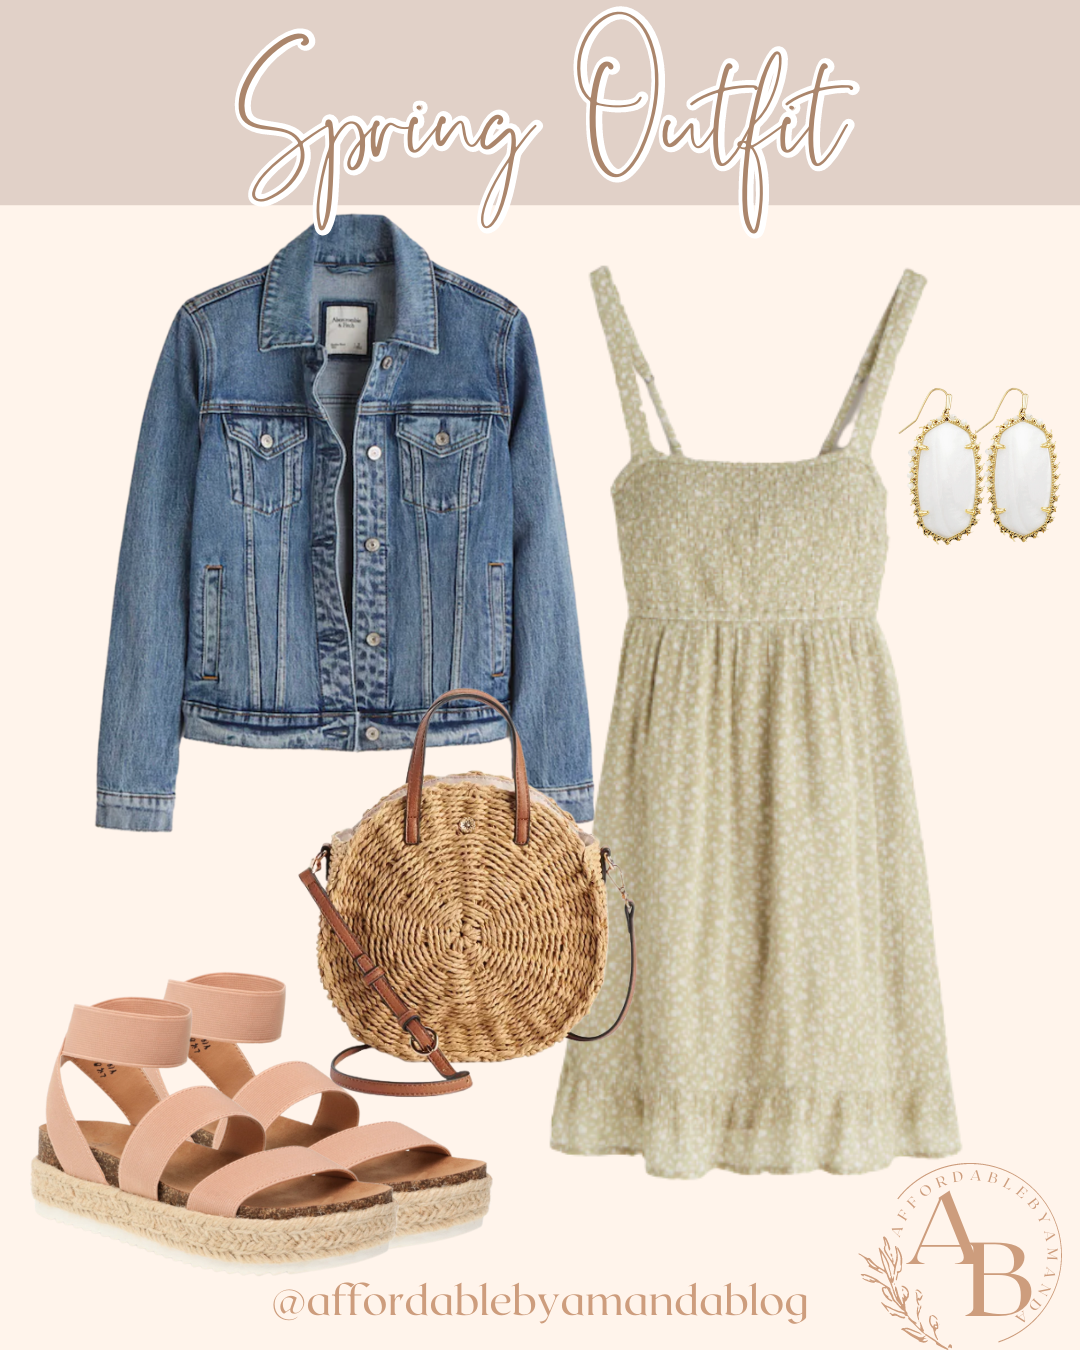 Cute Spring Outfits 2021 | Affordable by Amanda